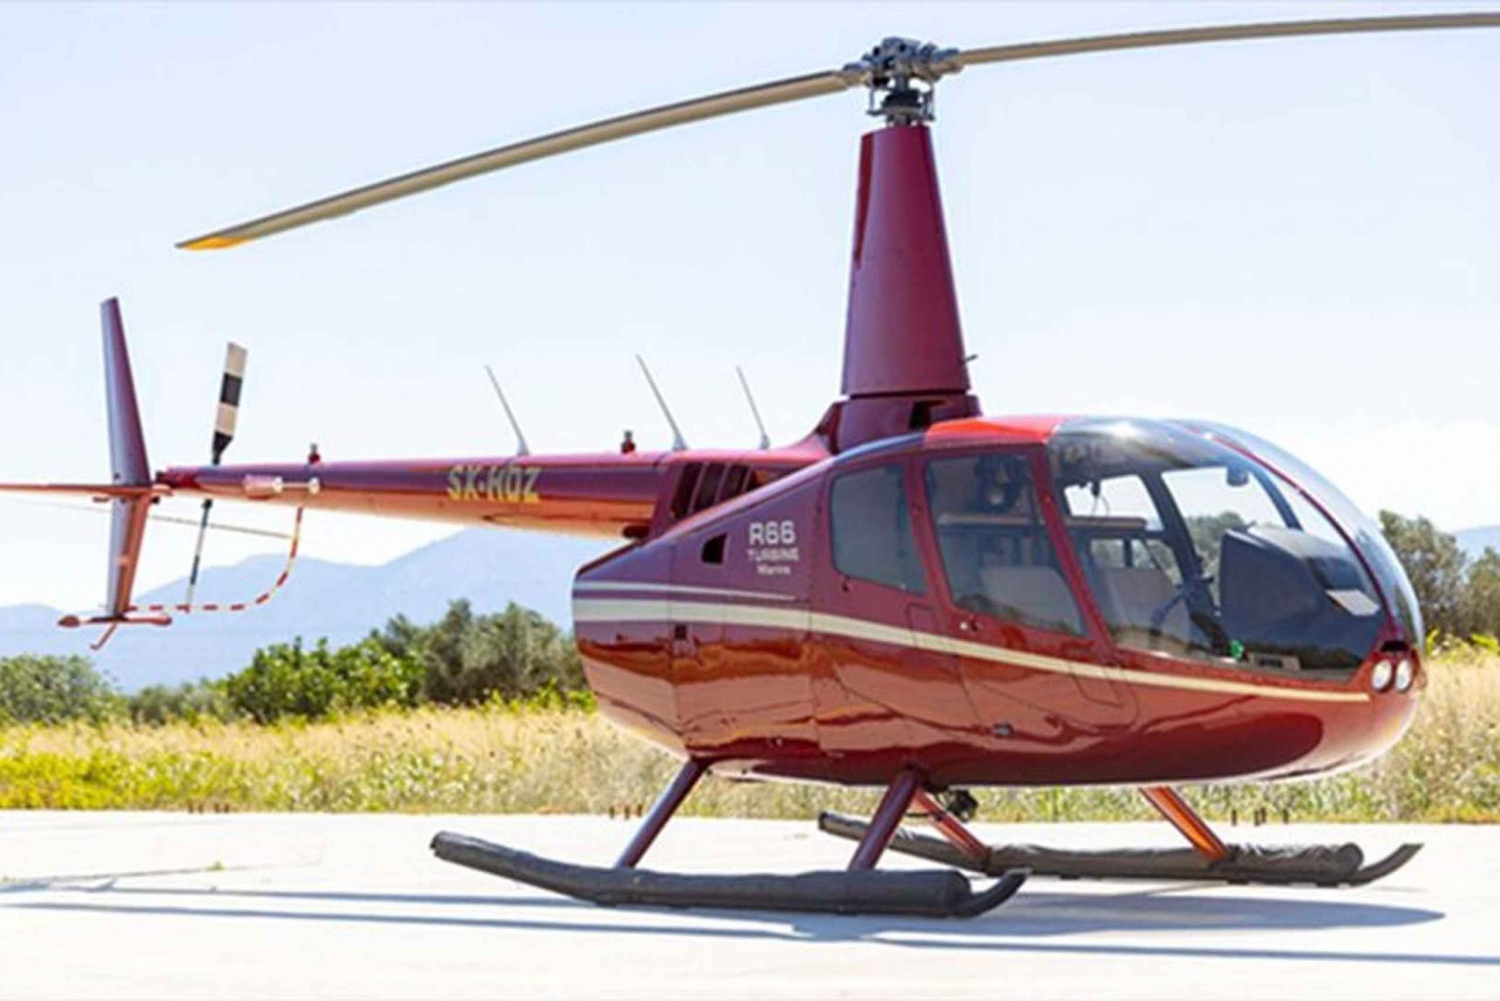 Athens Helicopter Tour: 45-Minute Sightseeing Flight